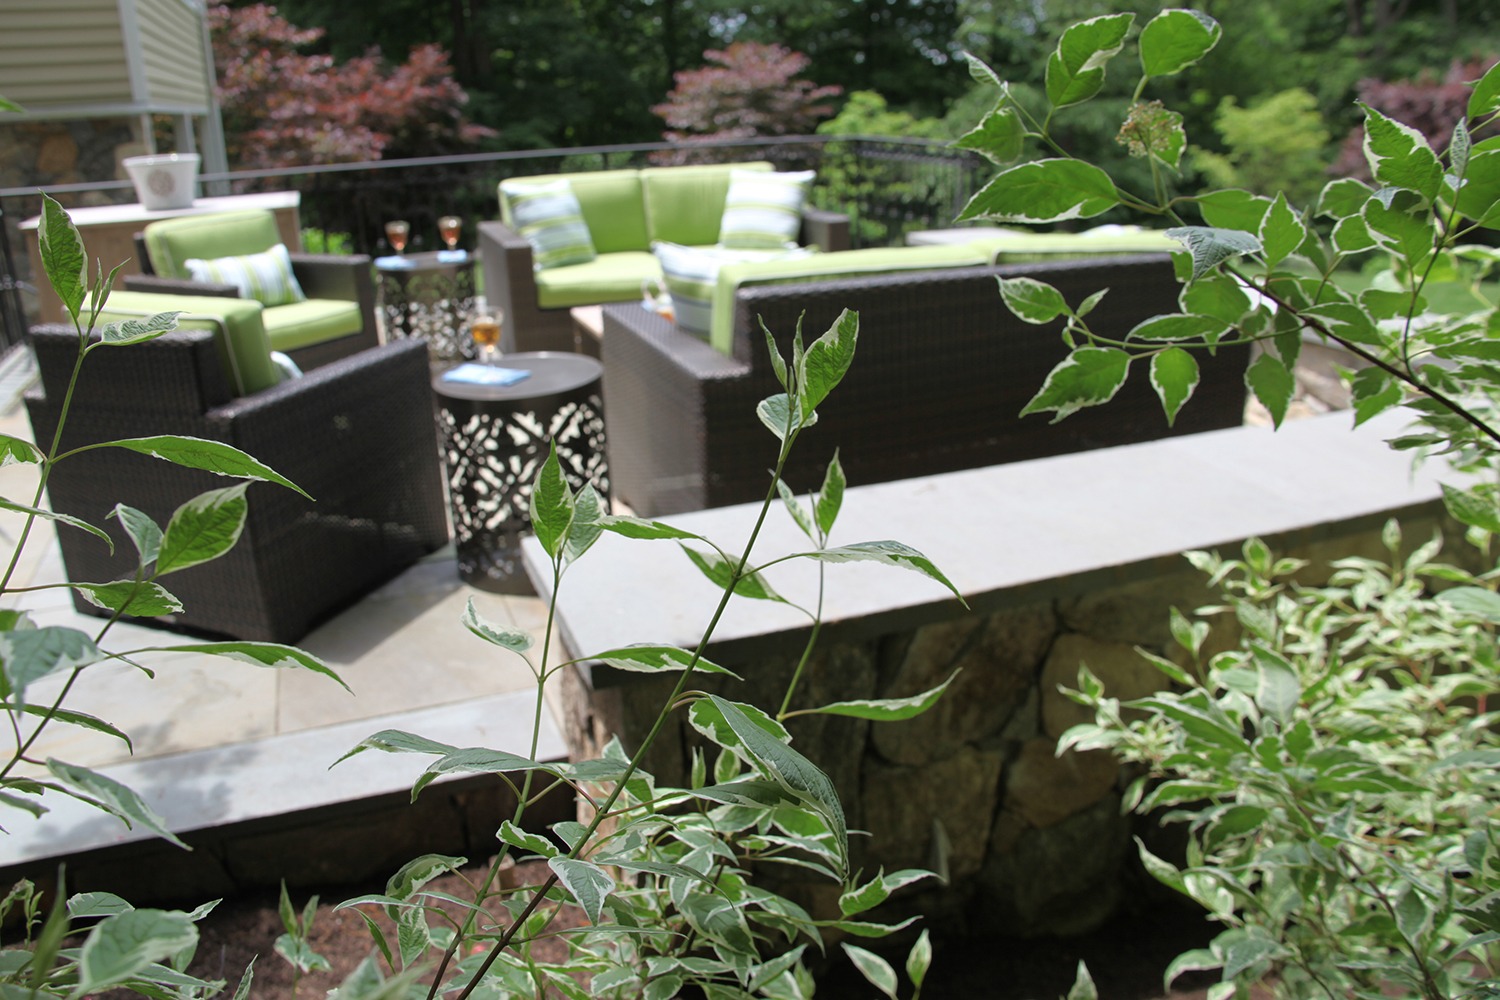 A patio with modern wicker furniture and green cushions. Plants foreground the setting. An ornate side table and wine glass are visible.